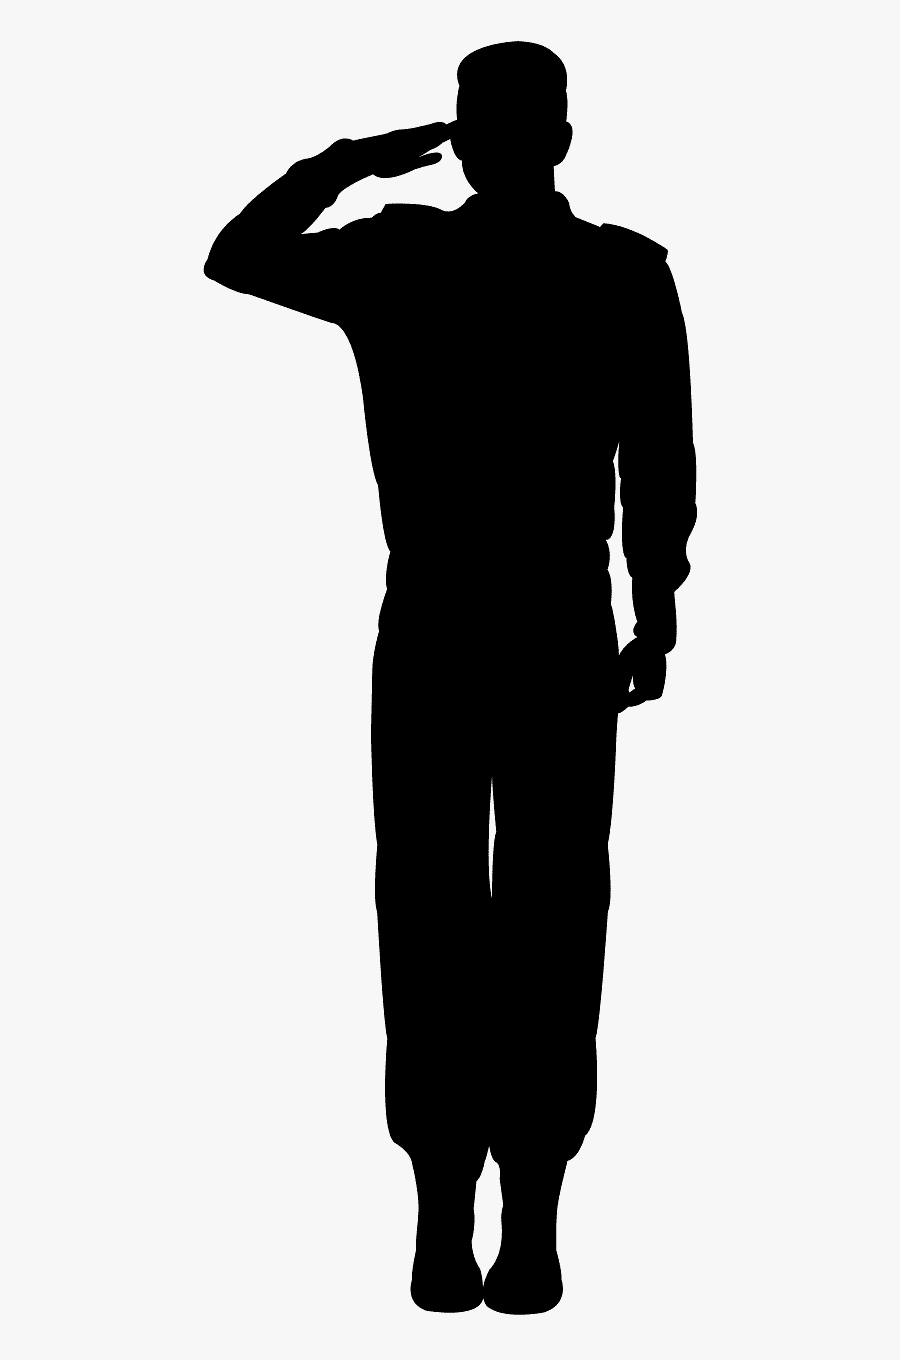 Soldier Black And White, Transparent Clipart